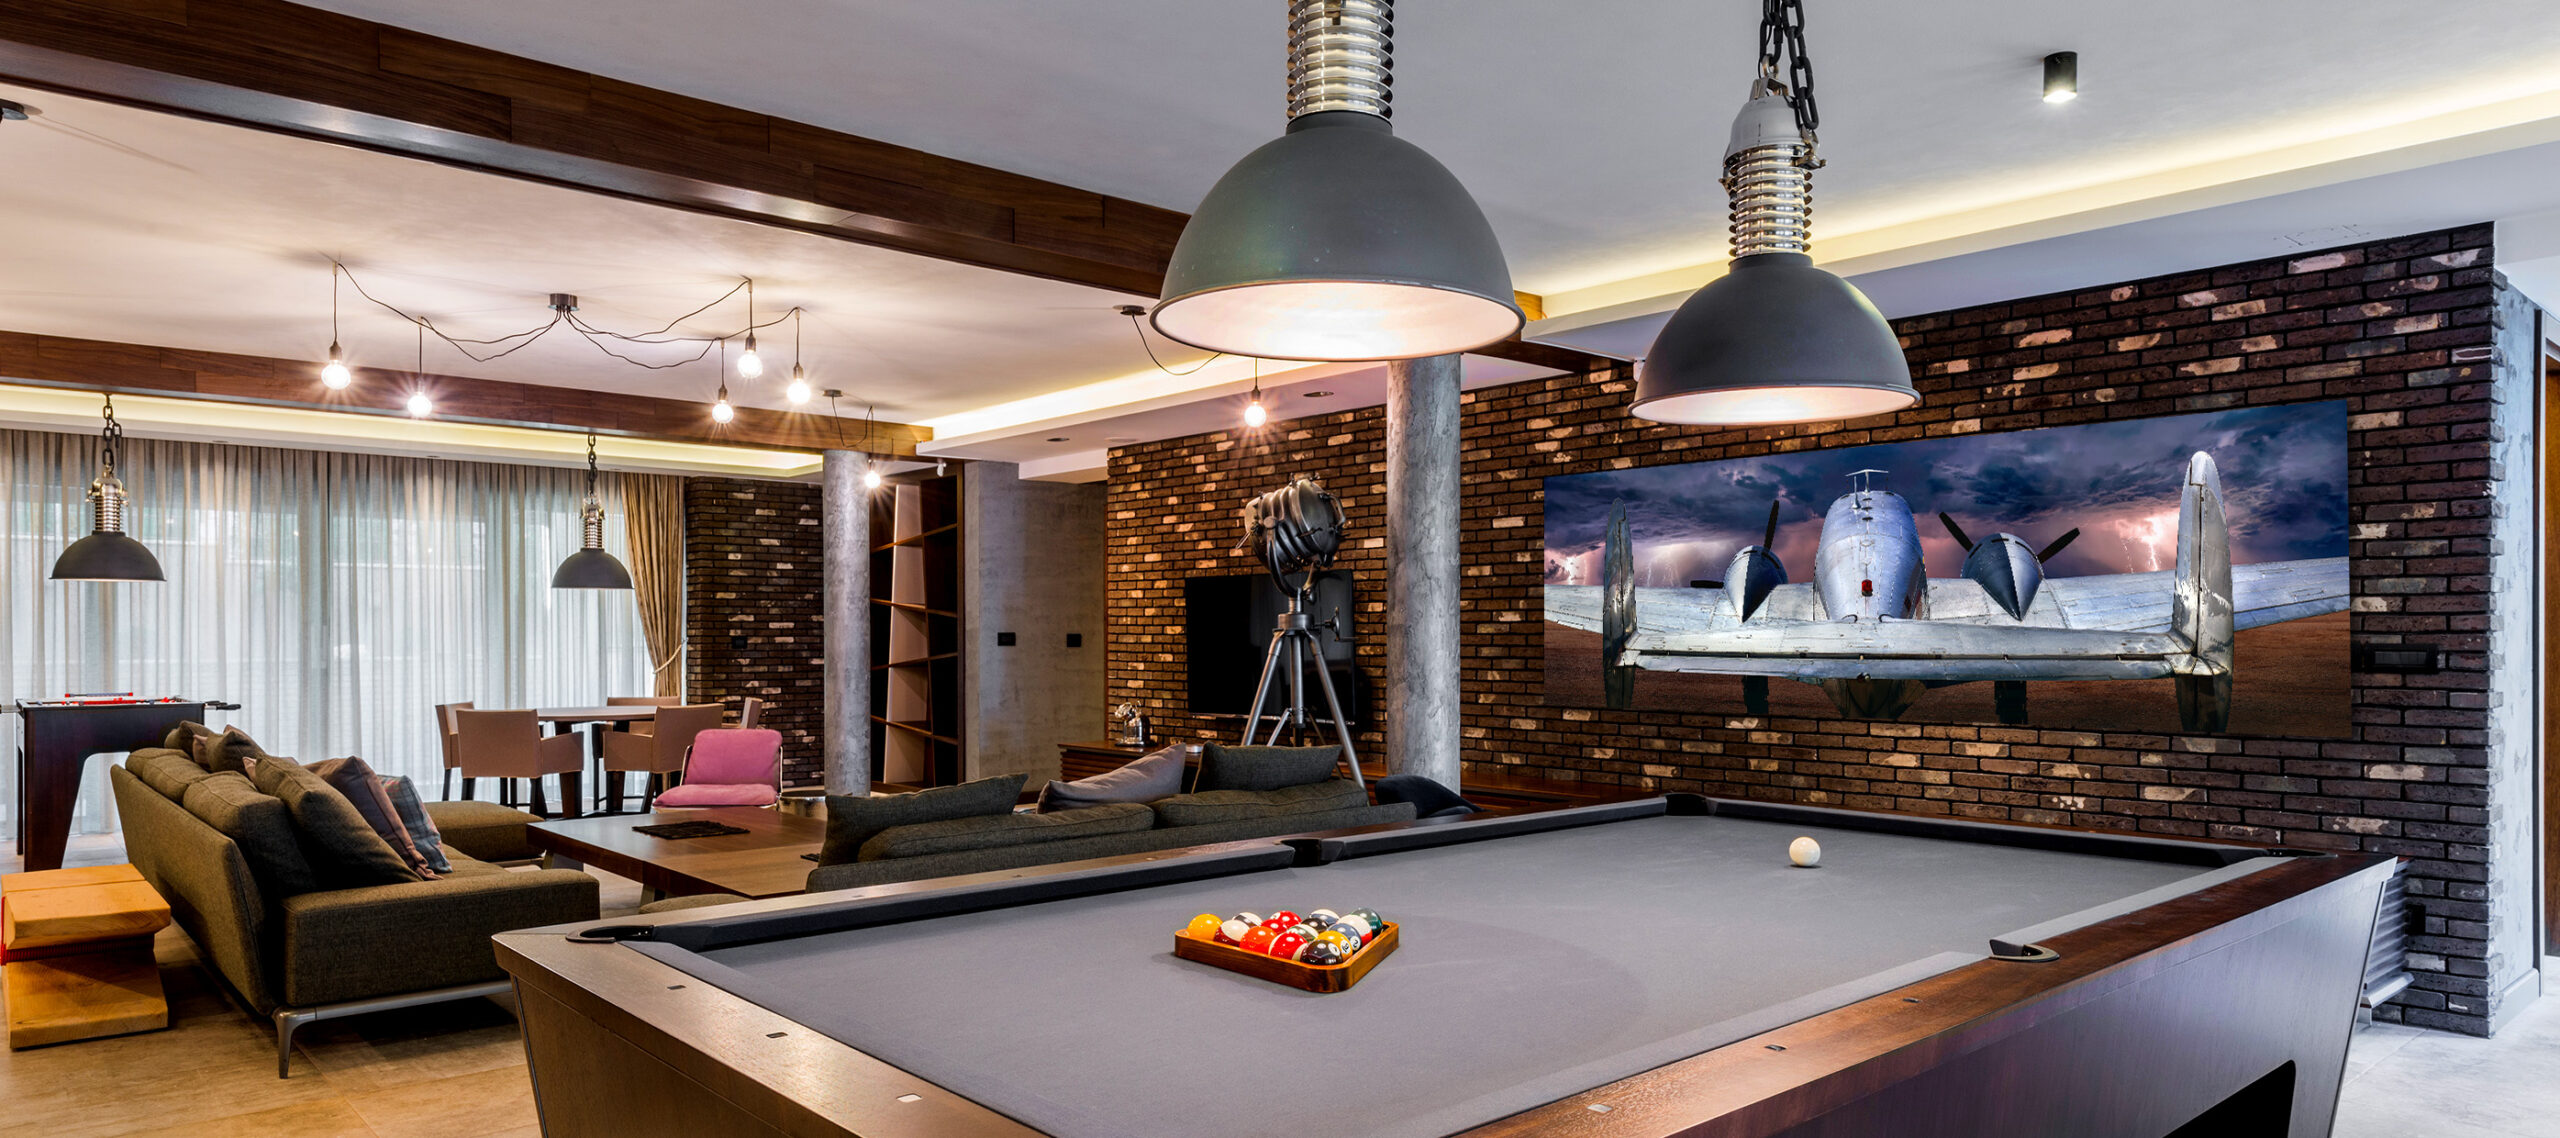 Interior,Of,A,Luxury,Living,Room,With,Billiard,Table